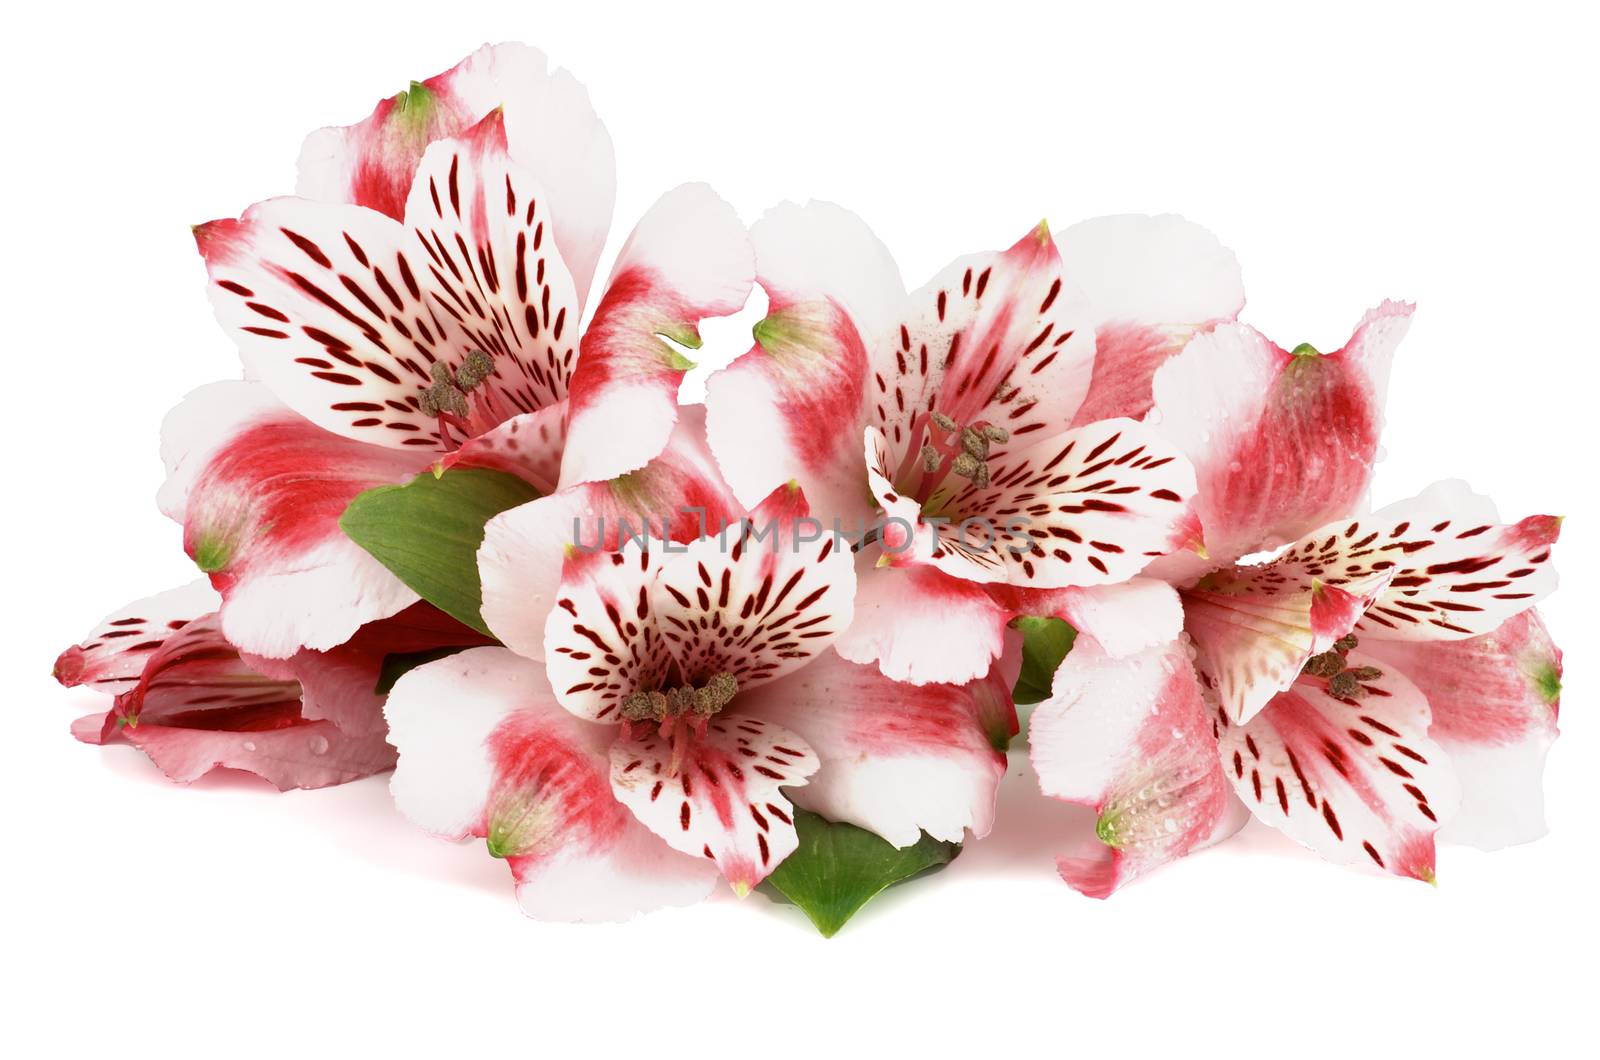 Five Beauty Pink Alstroemeria isolated in white background